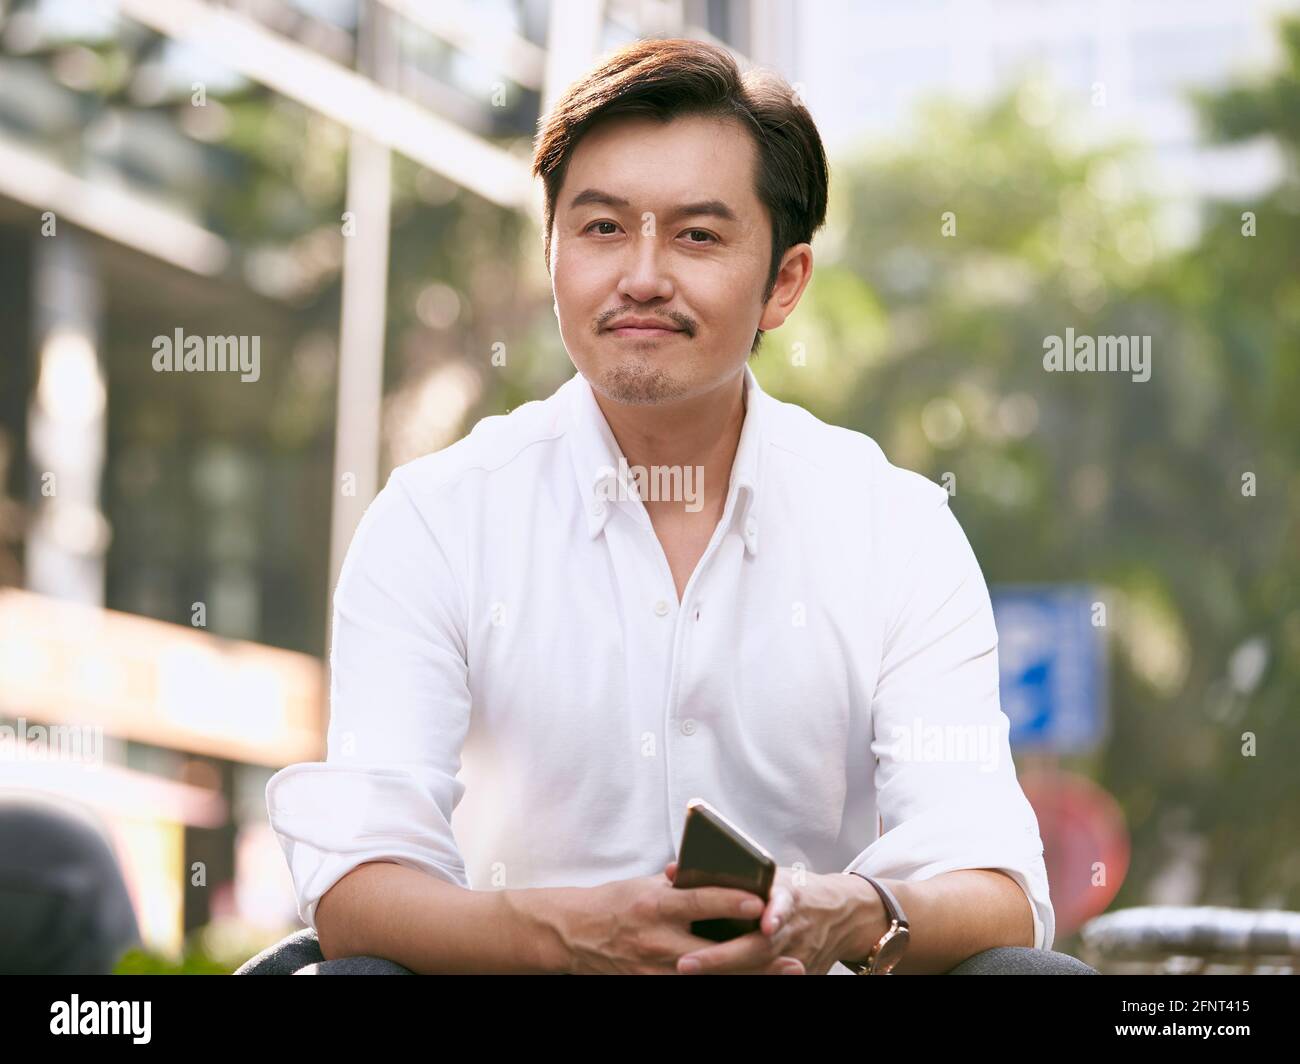 outdoor portrait of a successful asian businessman looking at camera smiling Stock Photo